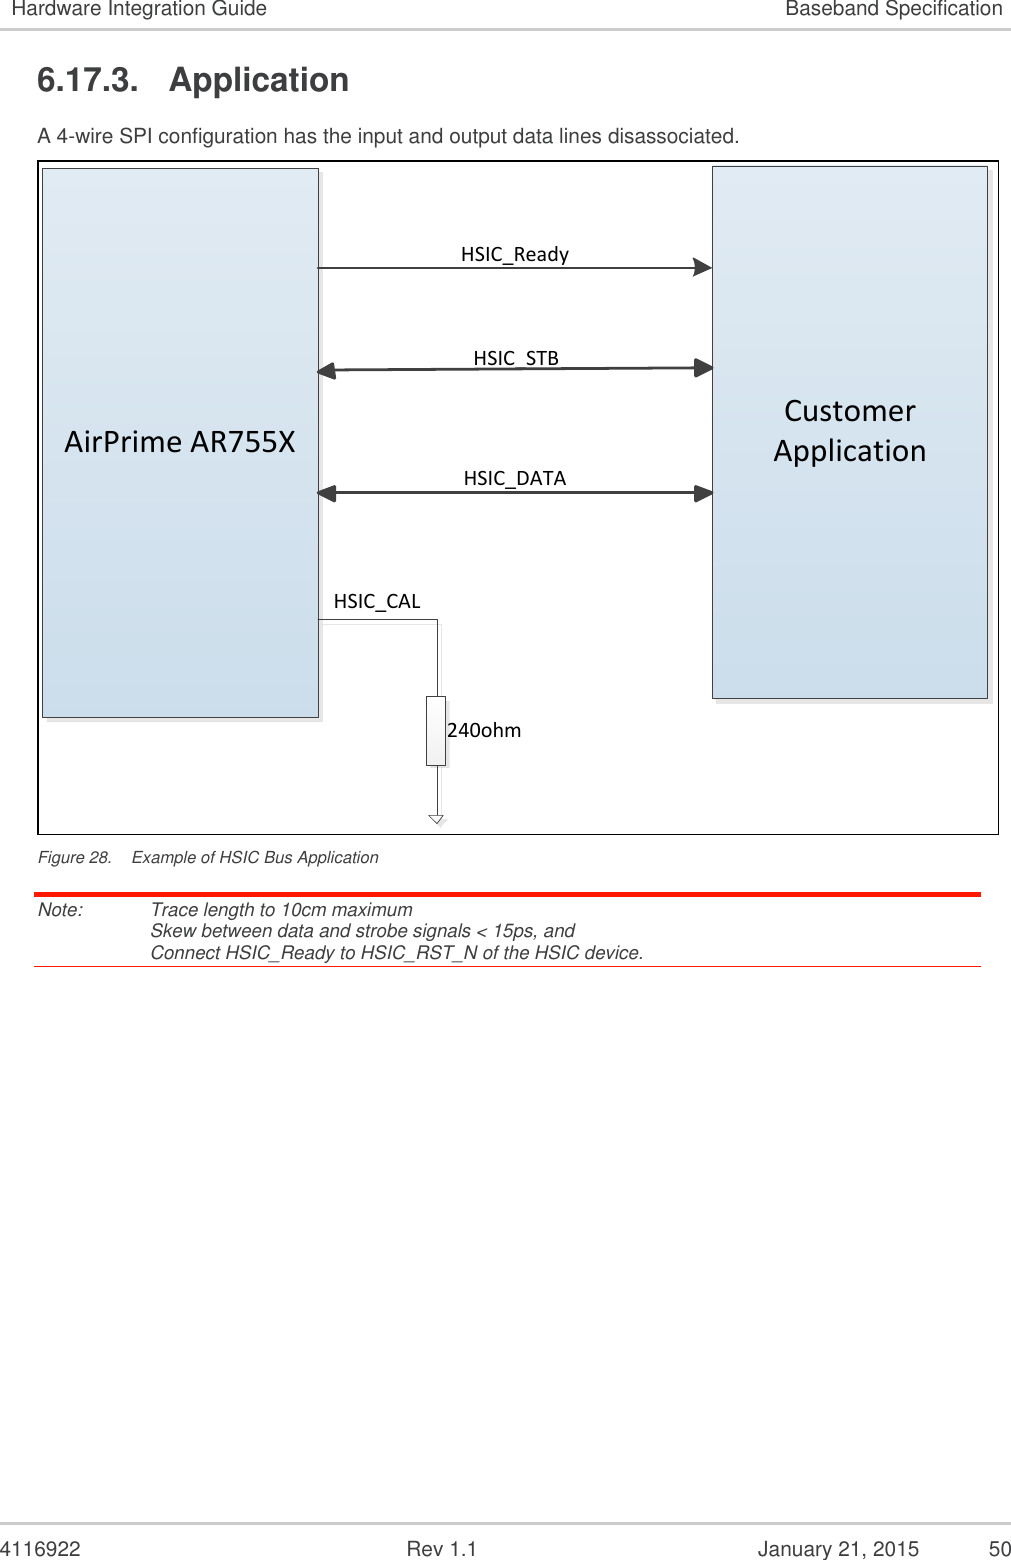   4116922              Rev 1.1          January 21, 2015  50 Hardware Integration Guide Baseband Specification 6.17.3.  Application A 4-wire SPI configuration has the input and output data lines disassociated. AirPrime AR755XCustomer ApplicationHSIC_ReadyHSIC_STBHSIC_DATAHSIC_CAL240ohm Figure 28.  Example of HSIC Bus Application Note:   Trace length to 10cm maximum Skew between data and strobe signals &lt; 15ps, and Connect HSIC_Ready to HSIC_RST_N of the HSIC device.   